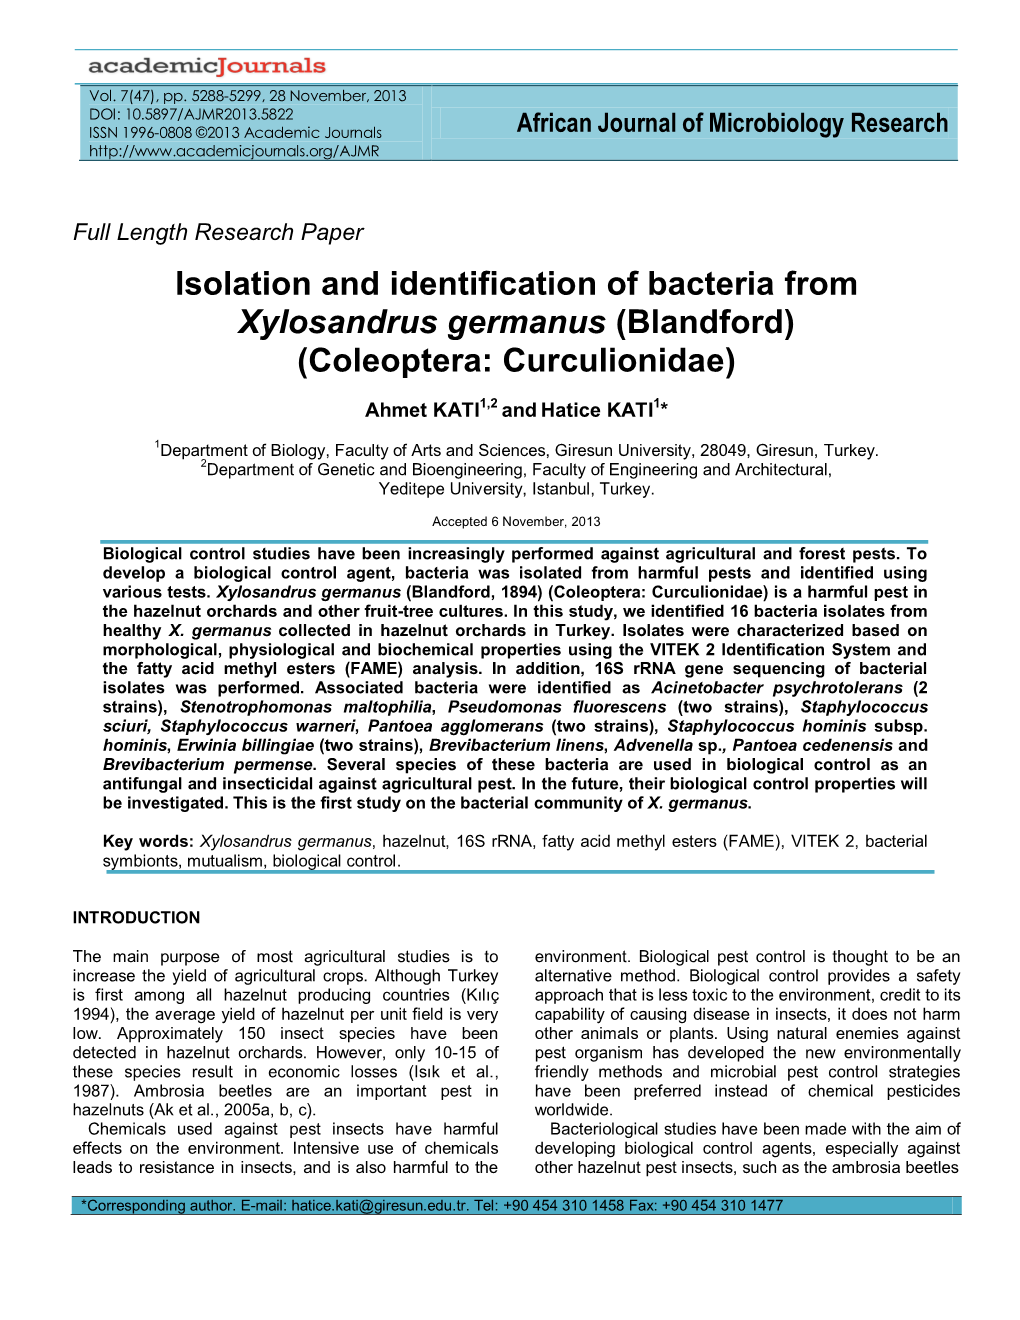 Isolation and Identification of Bacteria from Xylosandrus Germanus (Blandford)(Coleoptera: Curculionidae)